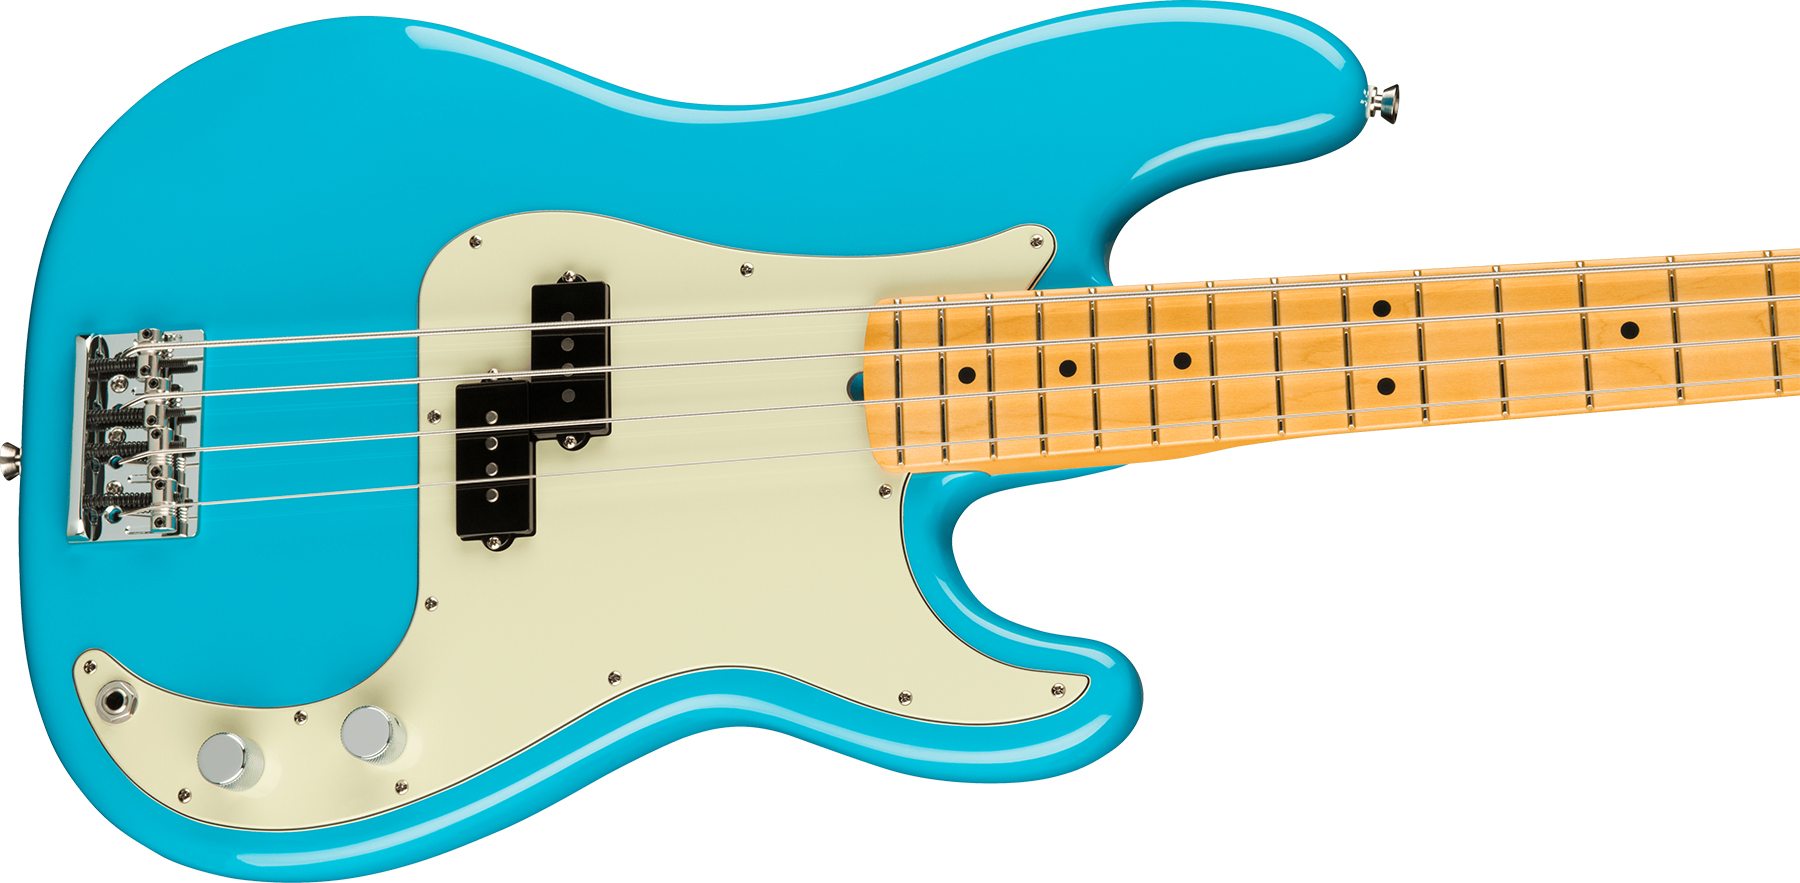 Fender Precision Bass American Professional Ii Usa Mn - Miami Blue - Solid body electric bass - Variation 2